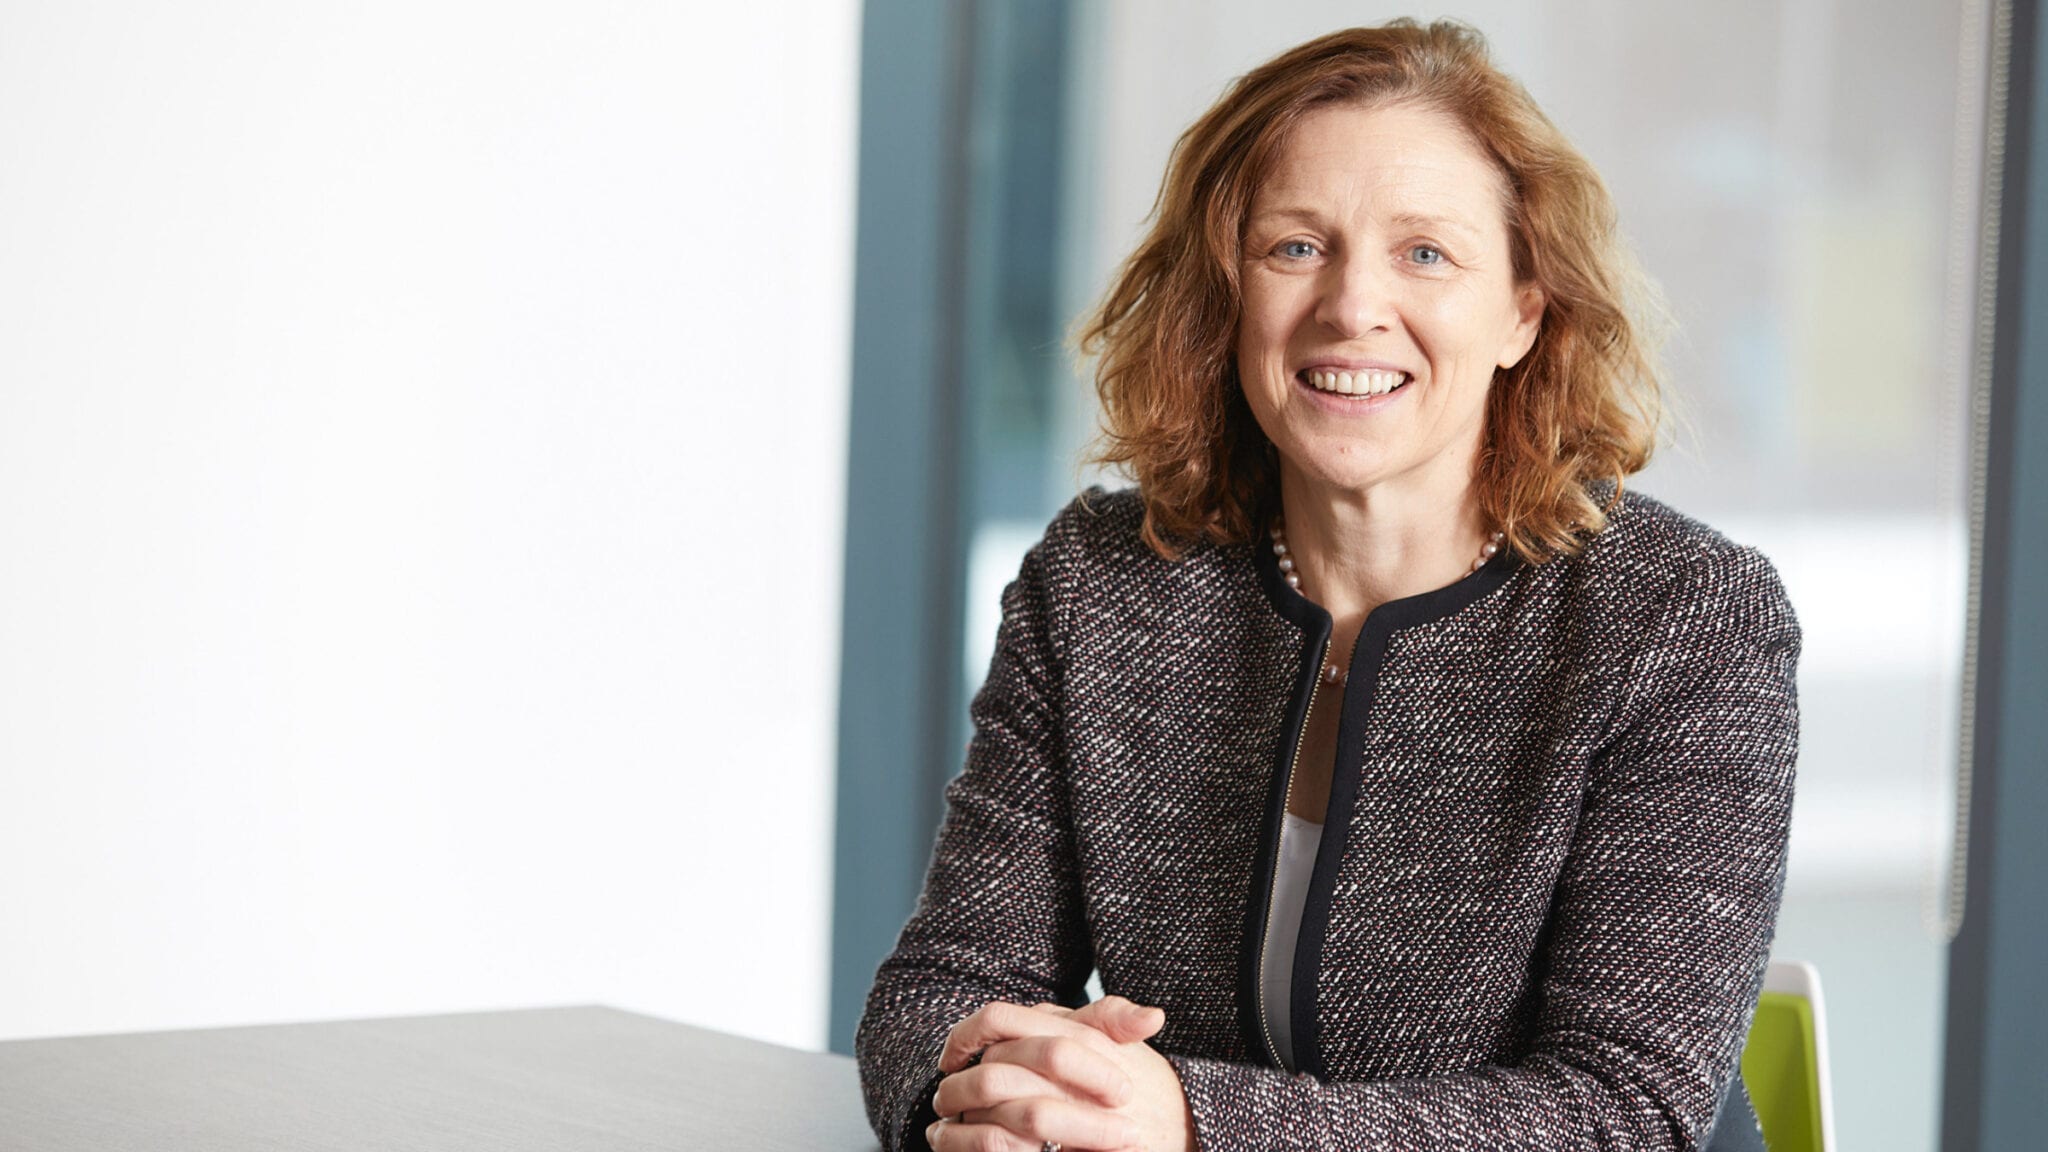 AstraZeneca CEO Pascal Soriot taps veteran cancer researcher Susan Galbraith for top oncology post